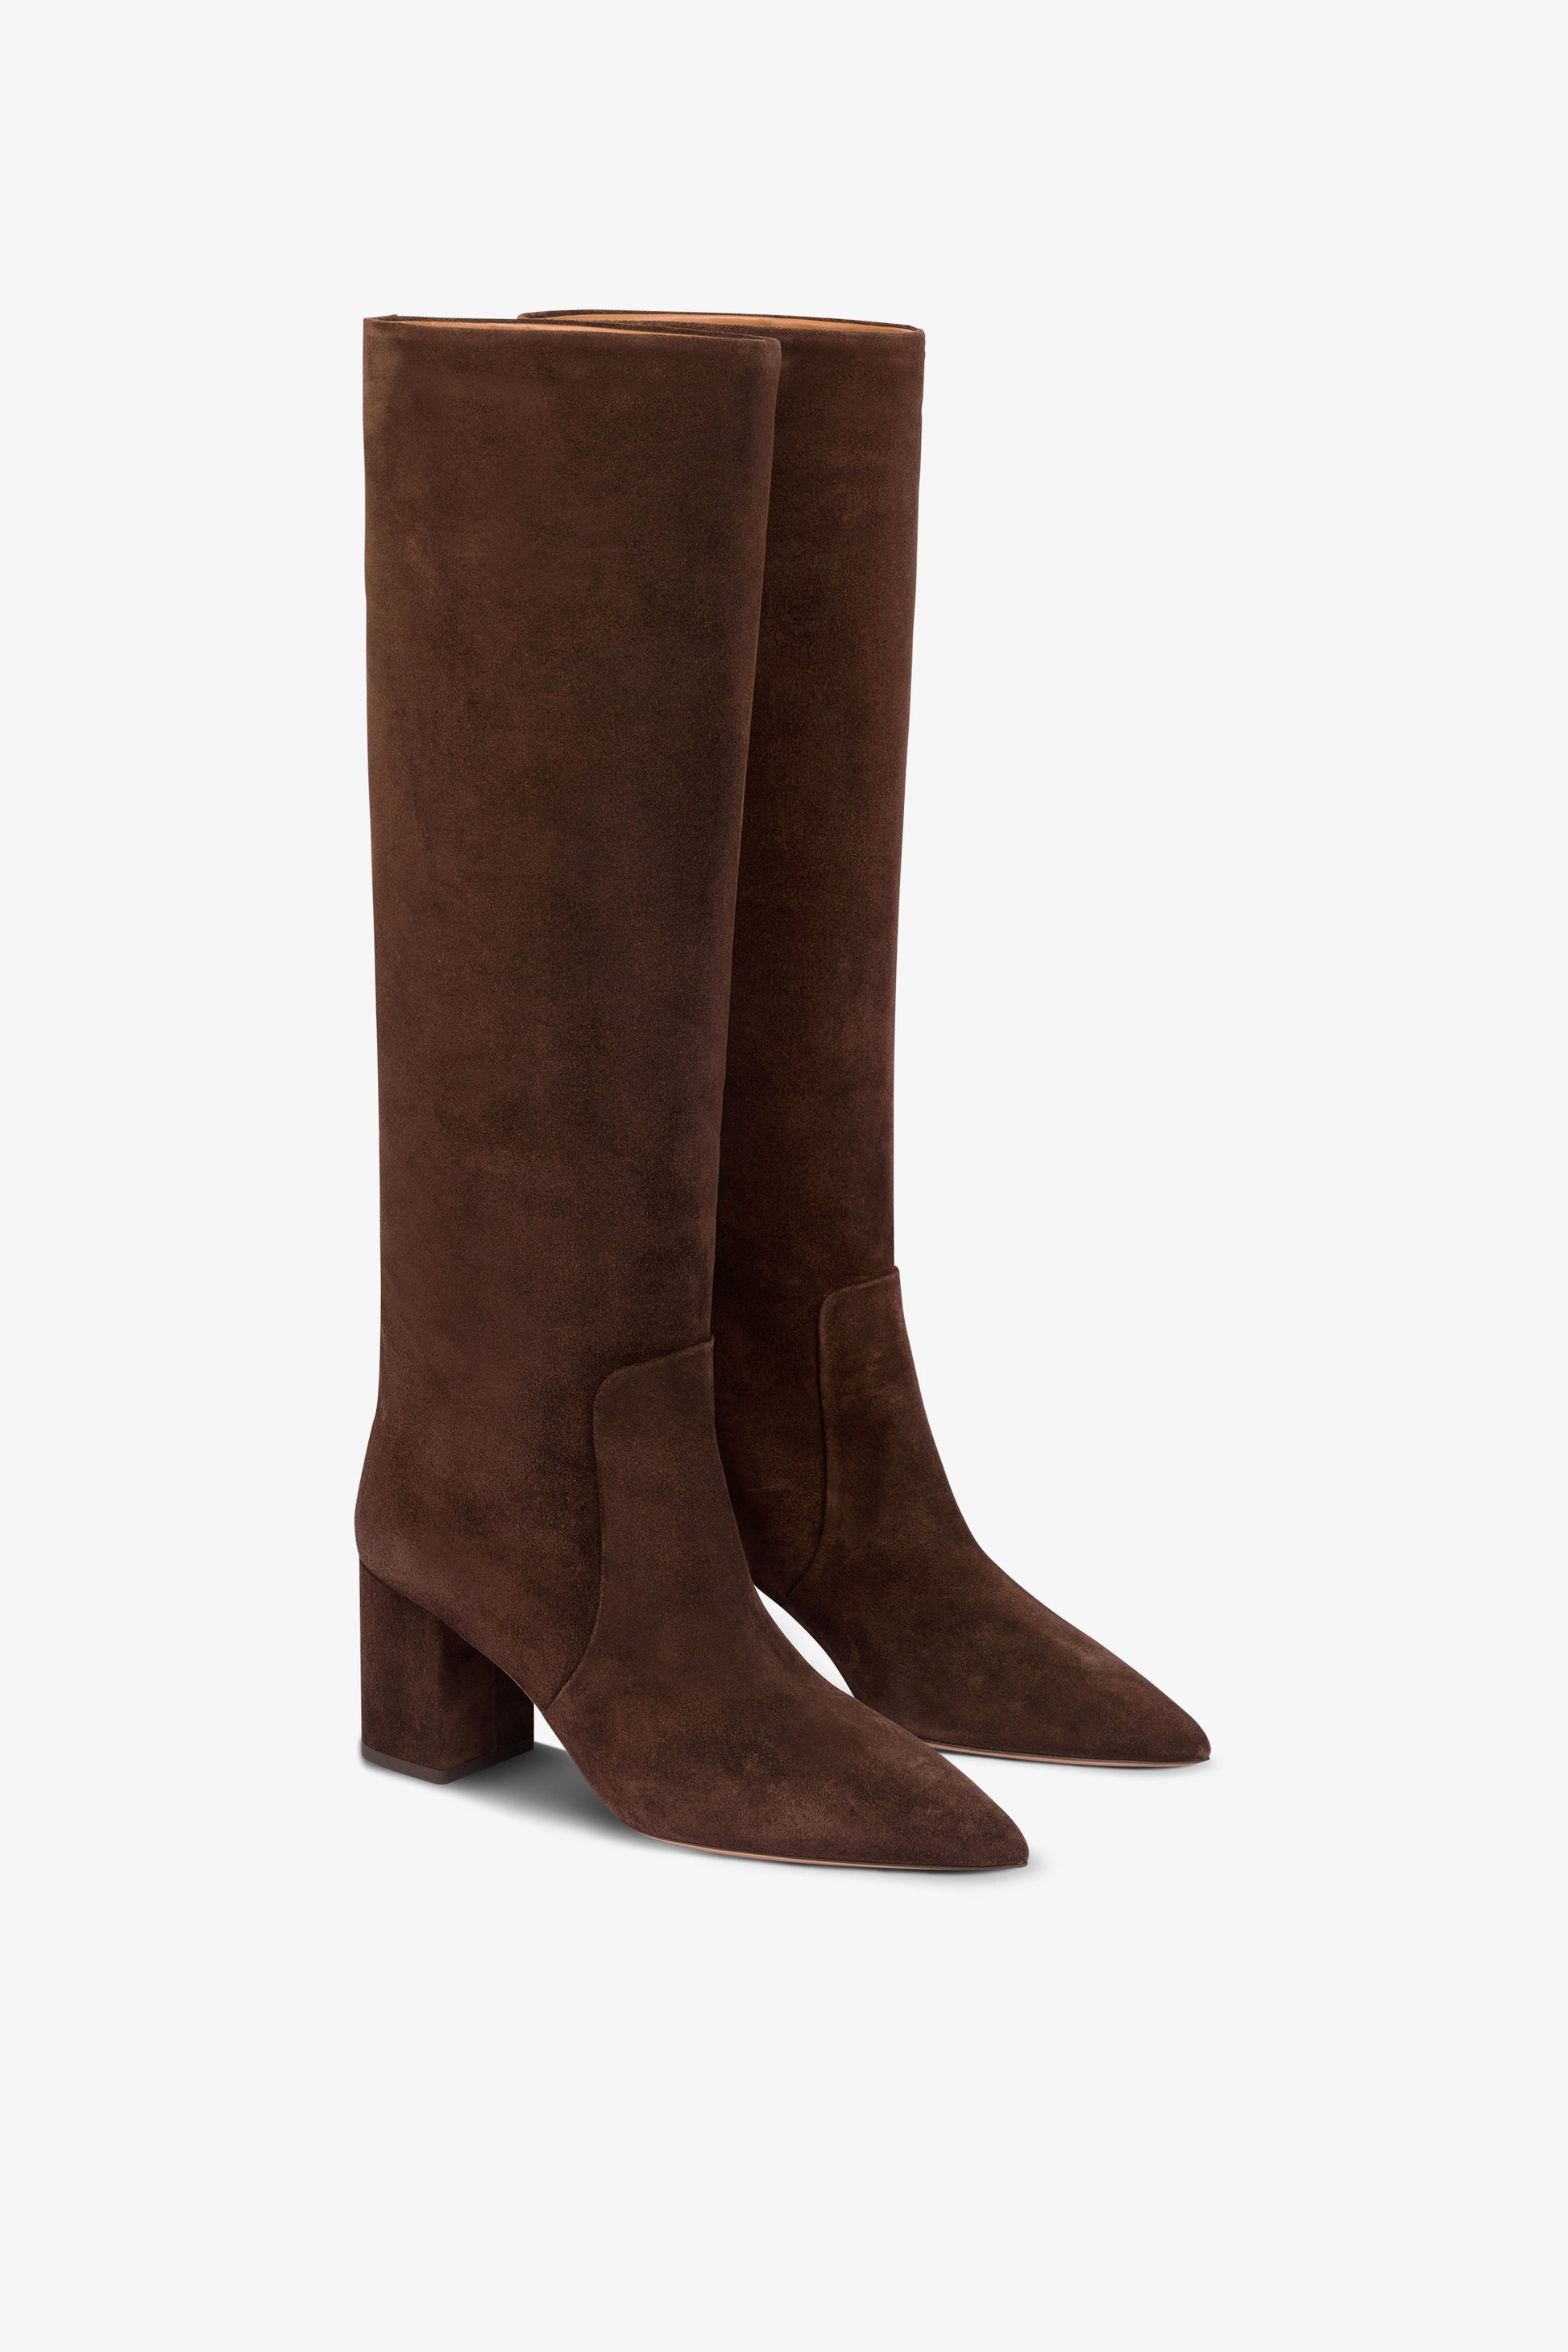 Knee-high boots in soft pepper suede leather